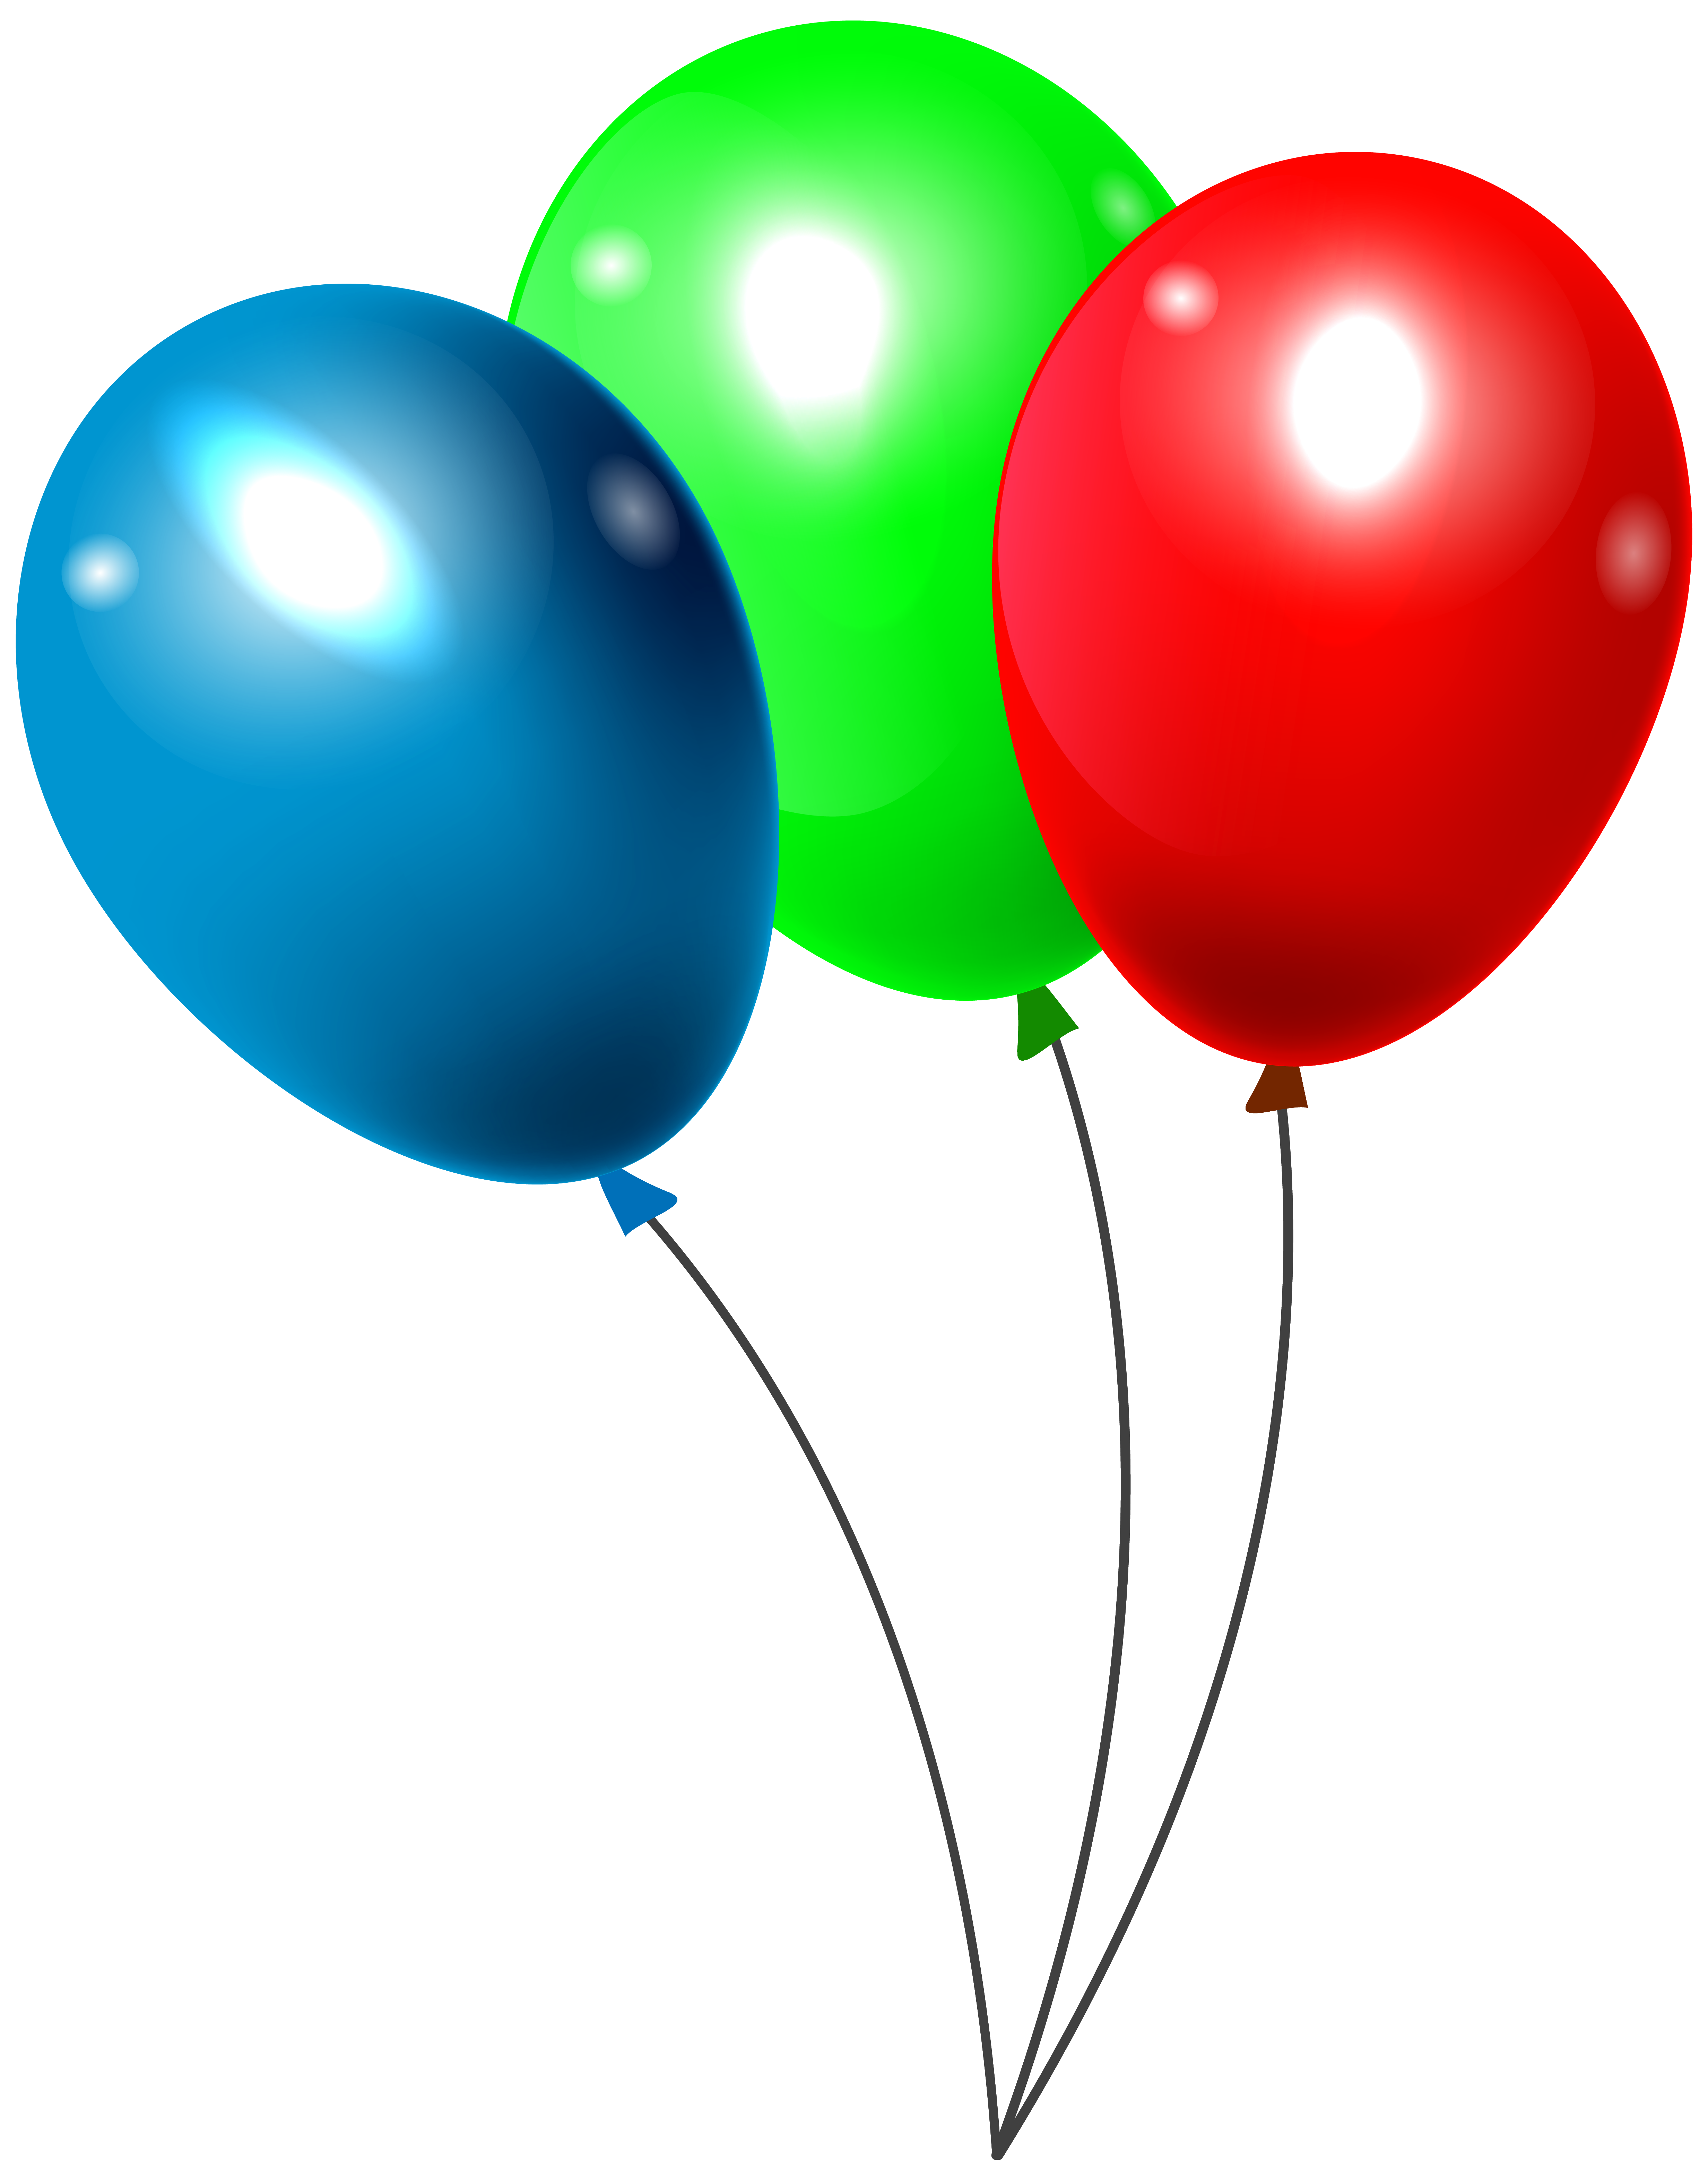 Three Balloons PNG Clipar Image | Gallery Yopriceville - High-Quality ...